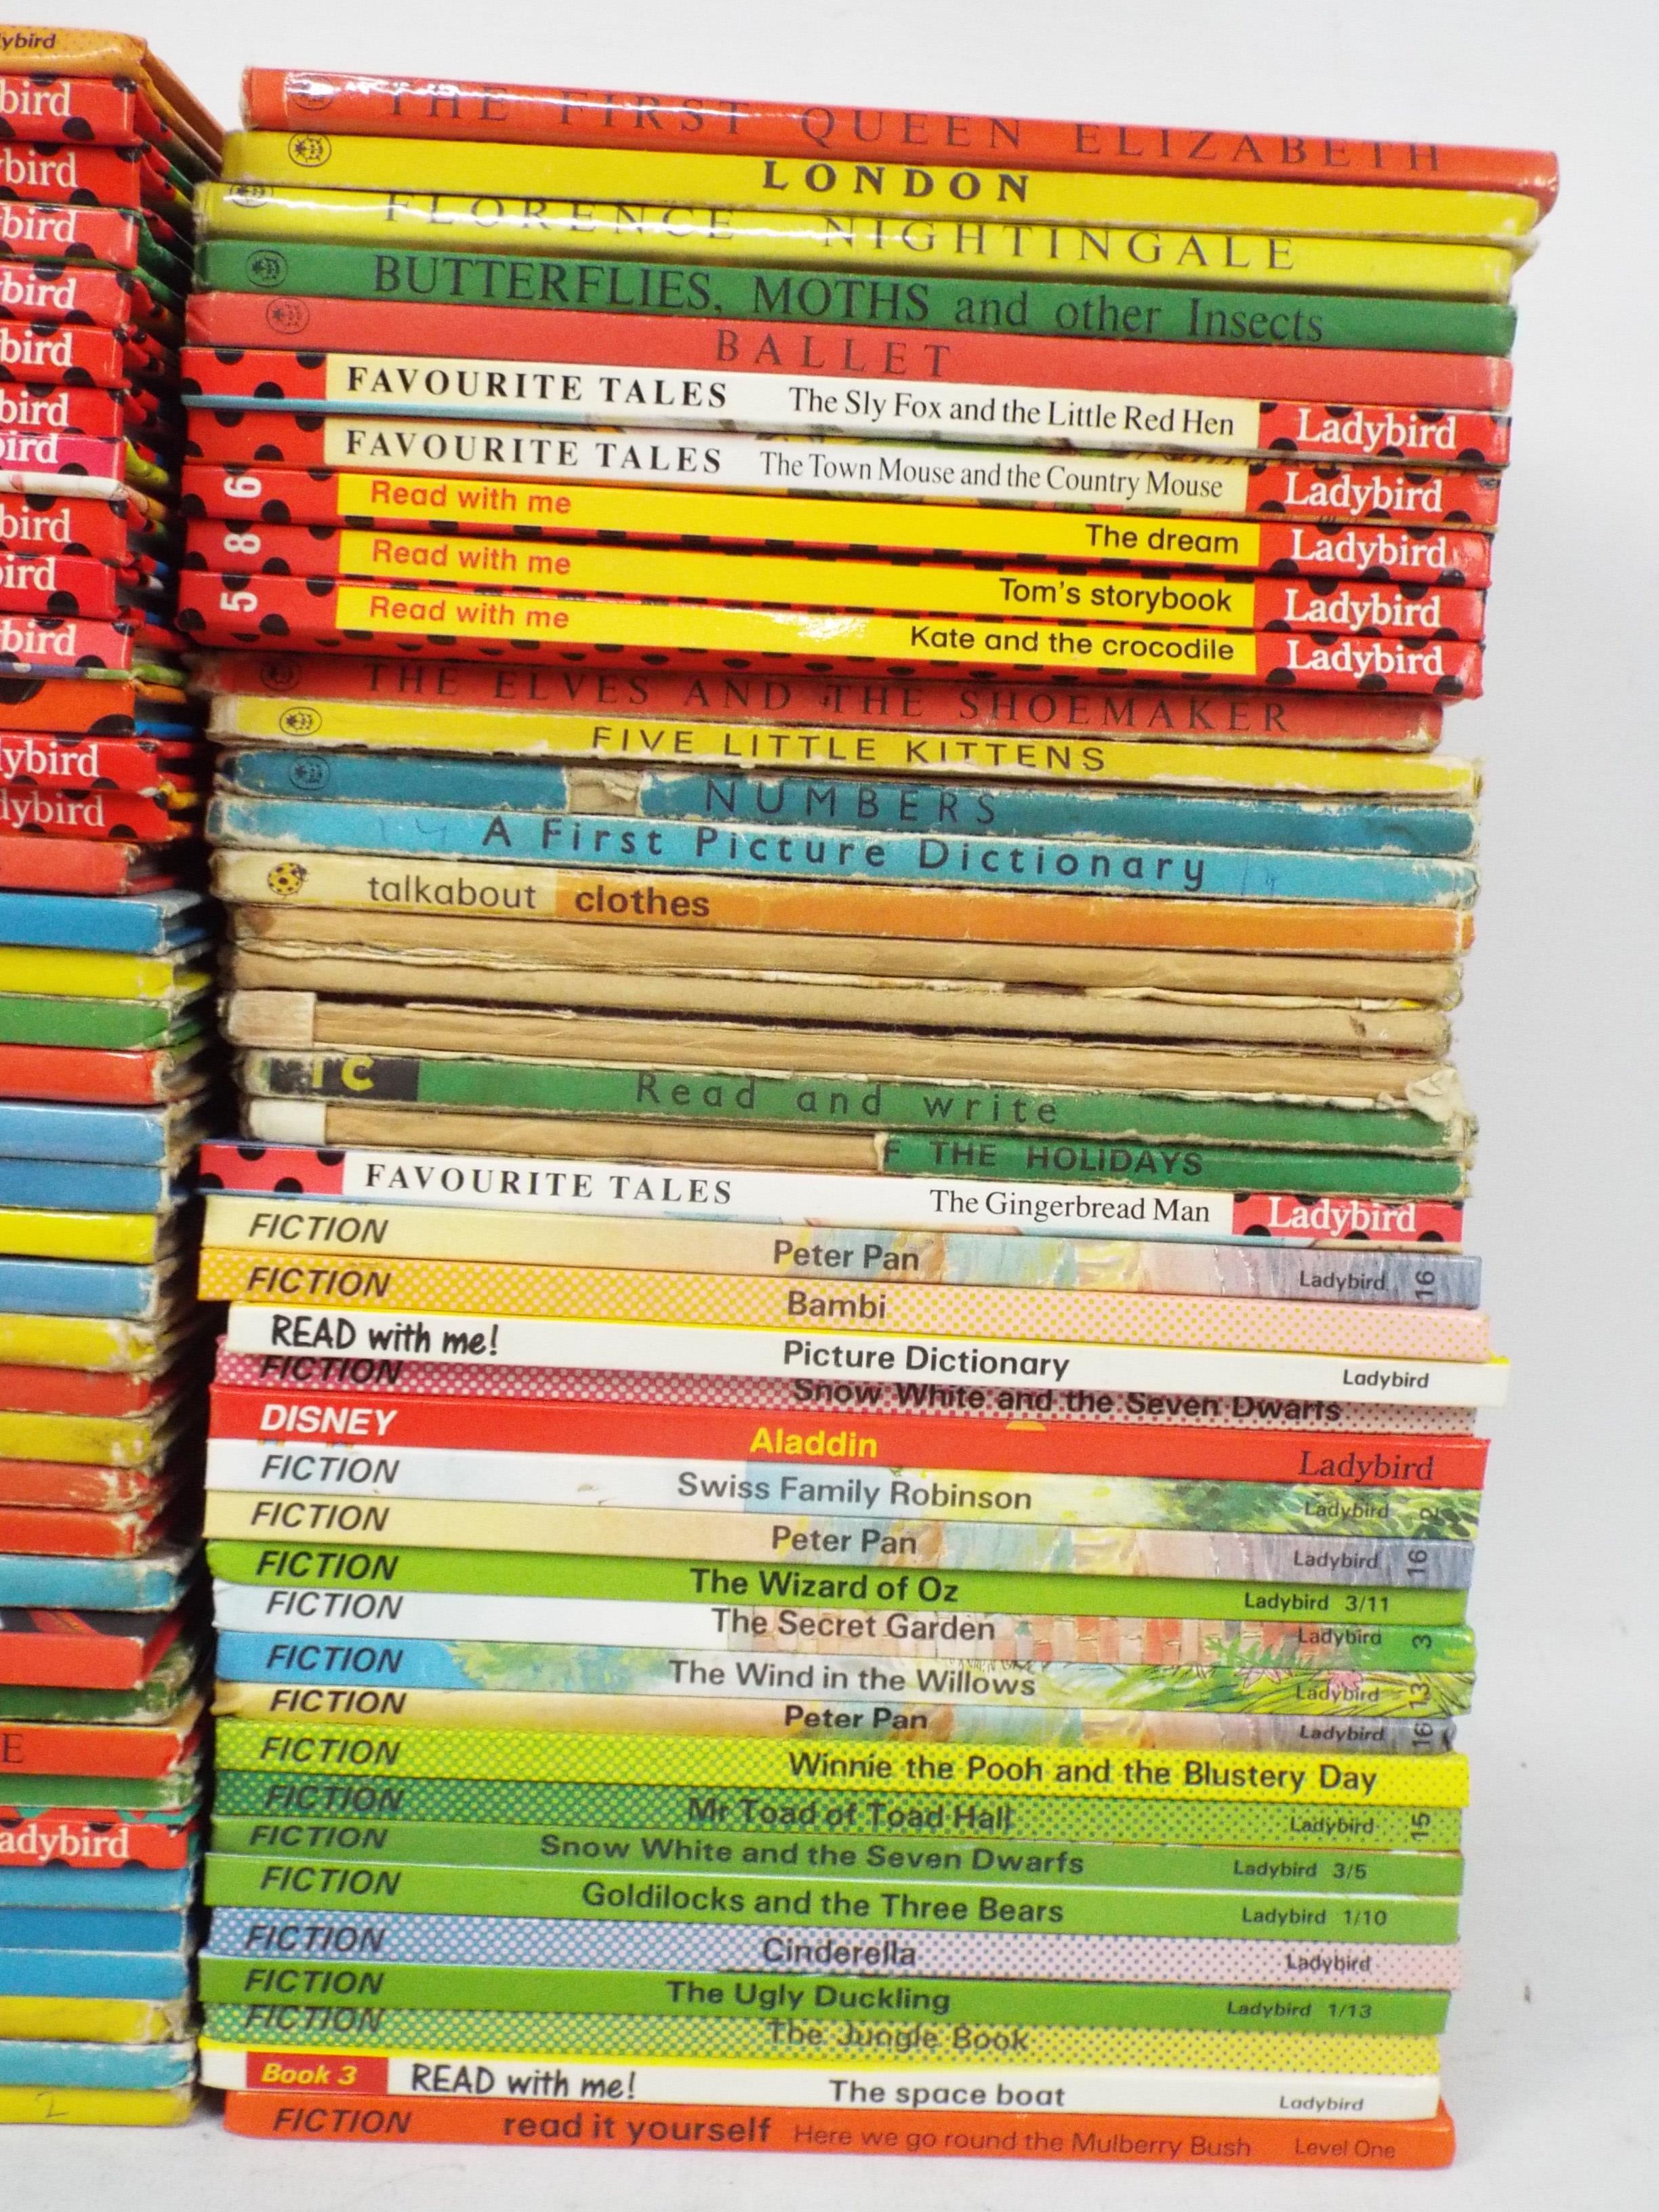 A collection of vintage Ladybird books, in excess of 100. - Image 4 of 6